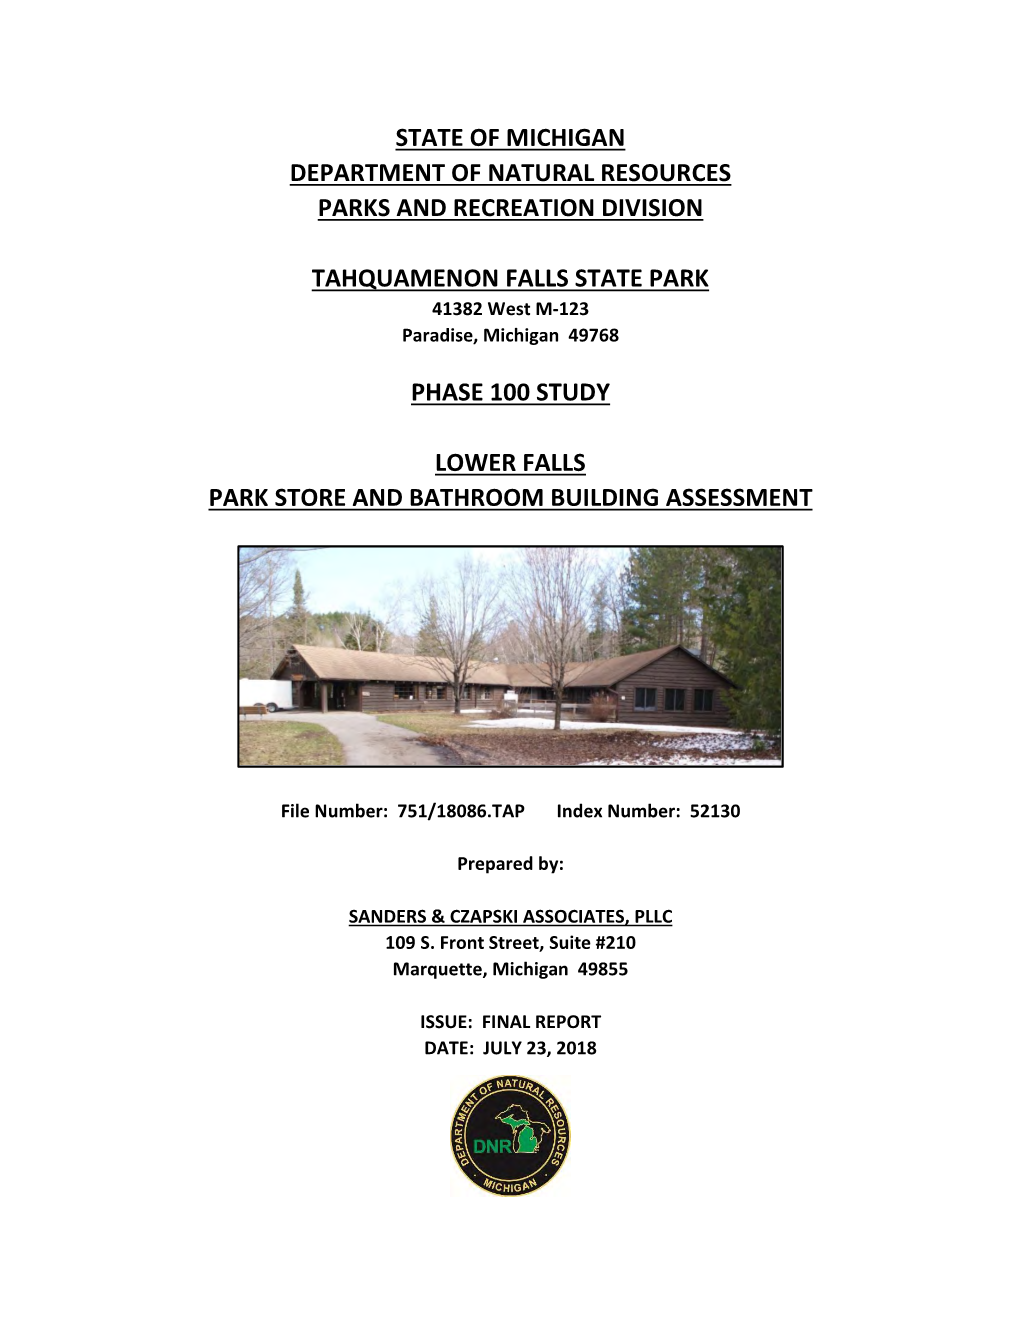 State of Michigan Department of Natural Resources Parks and Recreation Division